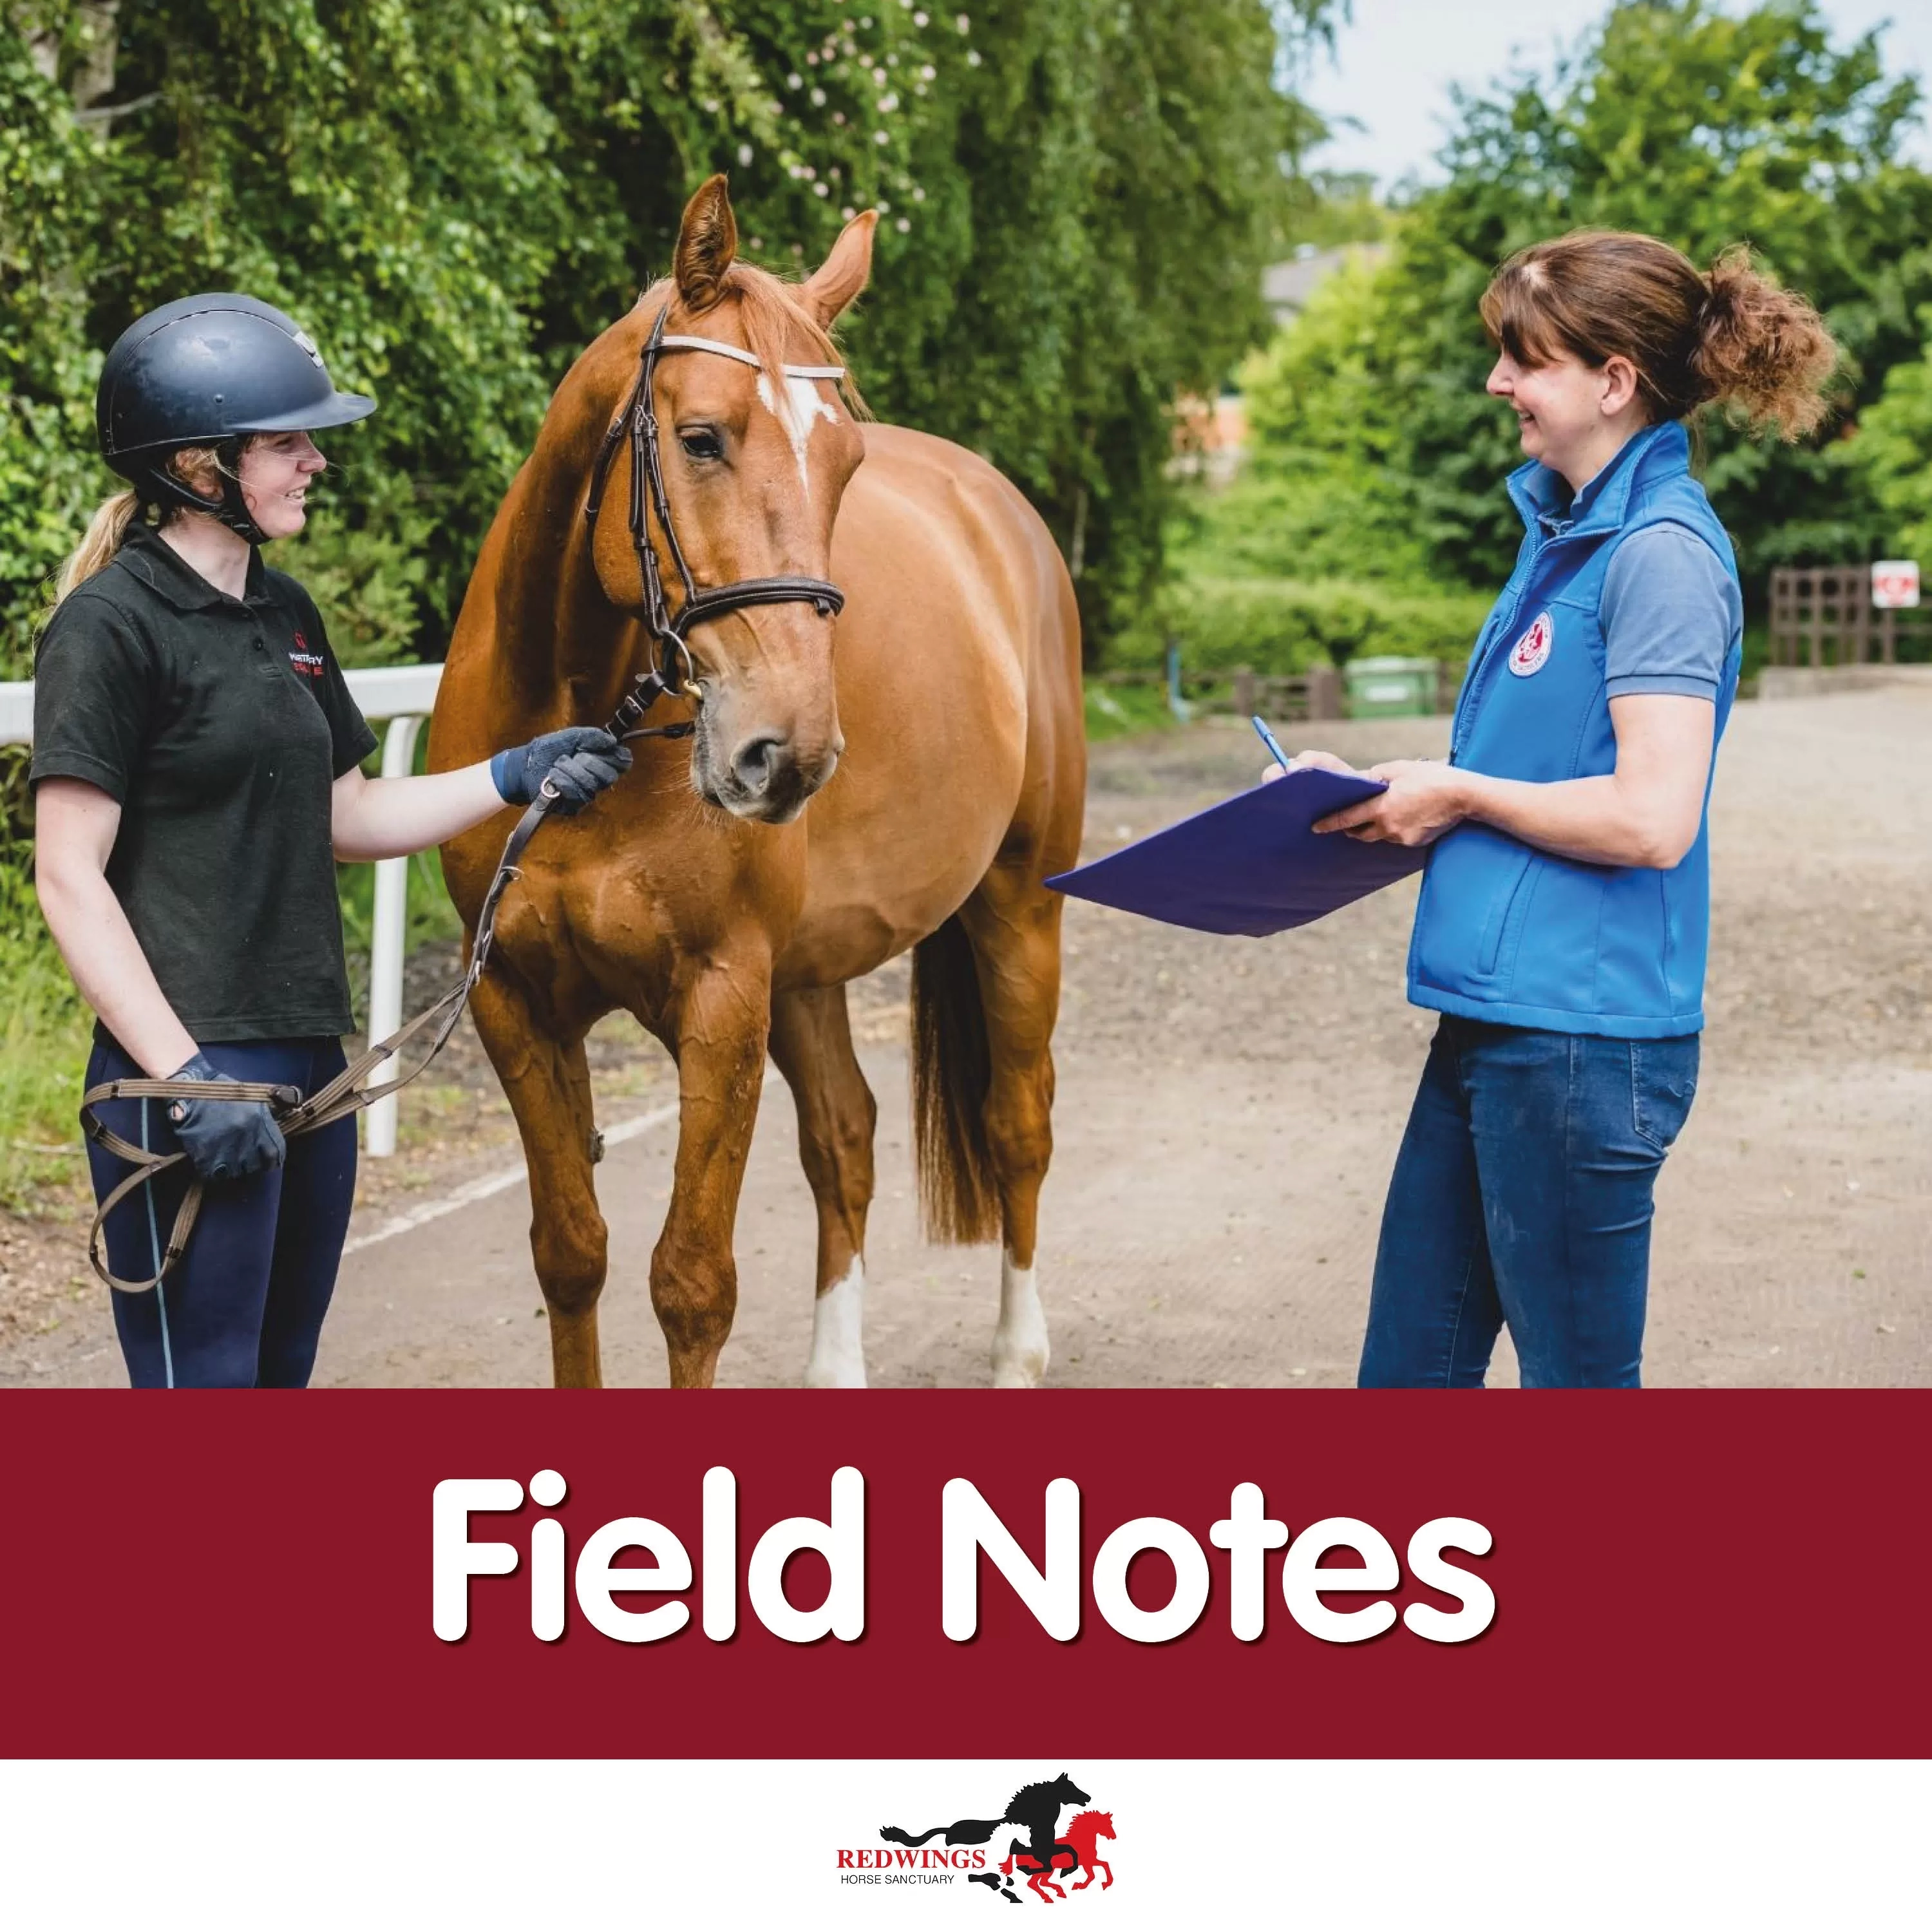 The cover image for our Field Notes podcast